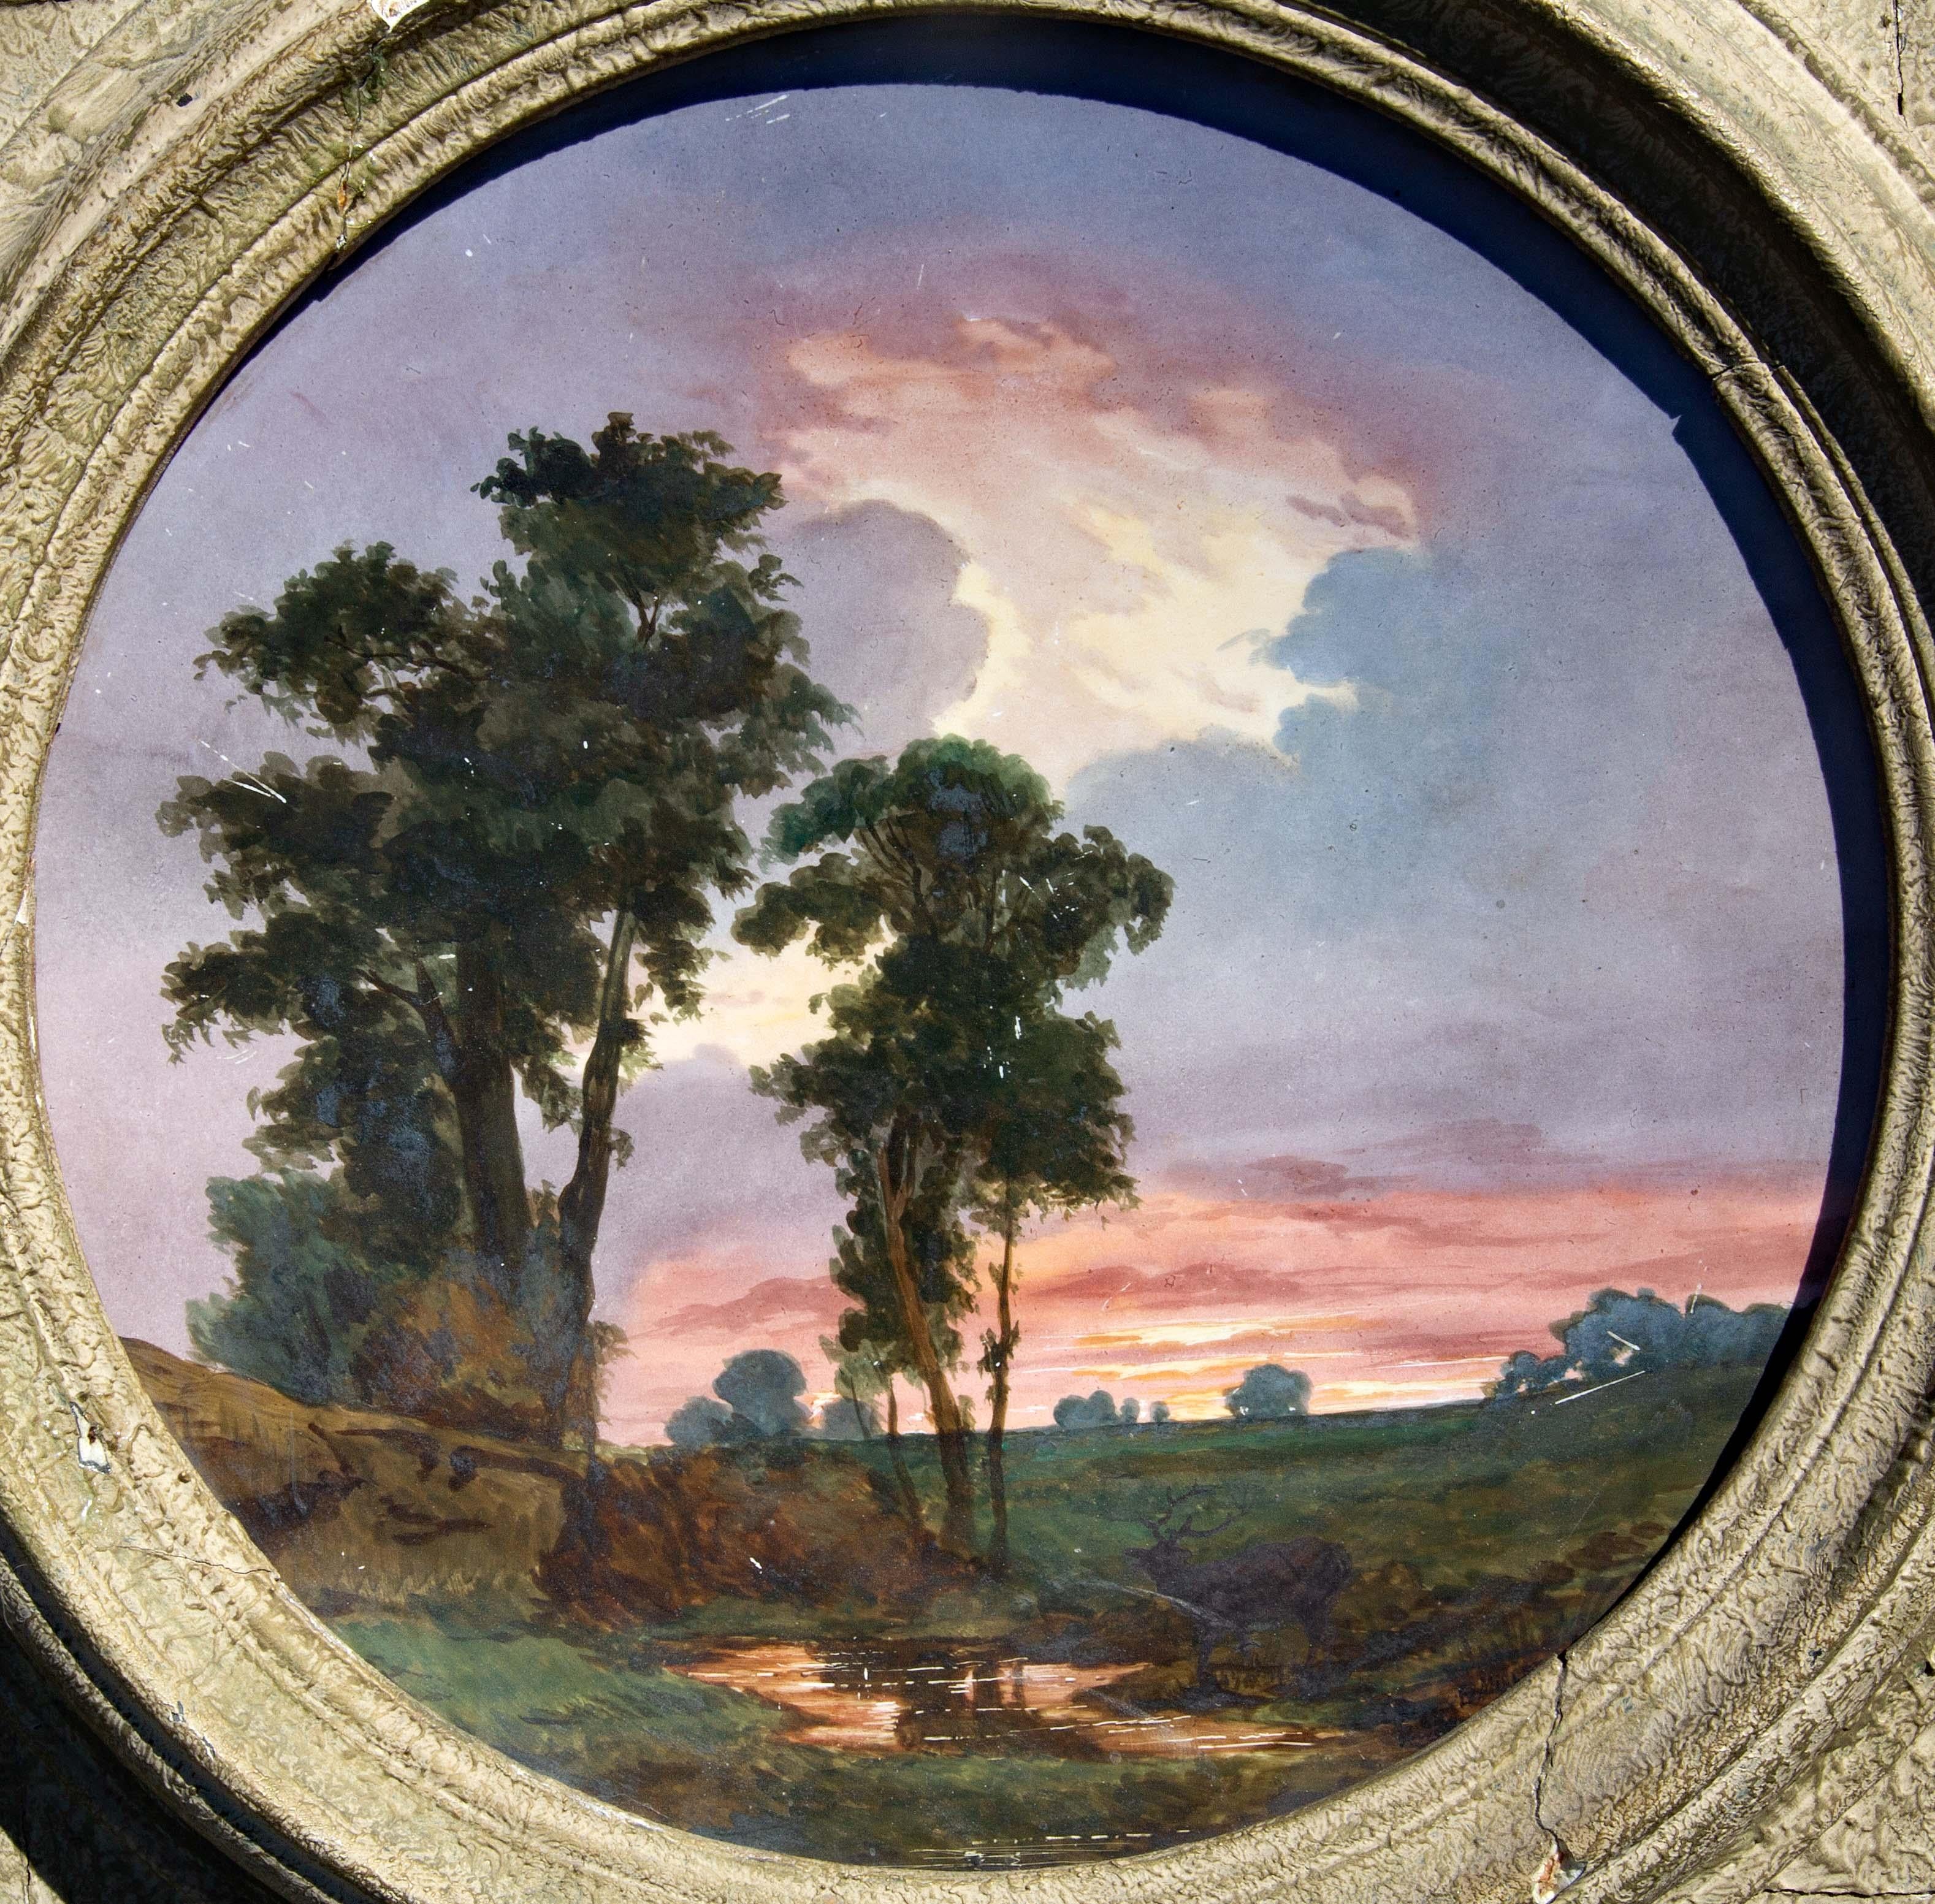 Barbizon Landscape Painting on French Porcelain Charger 19th Century by Millet For Sale 1